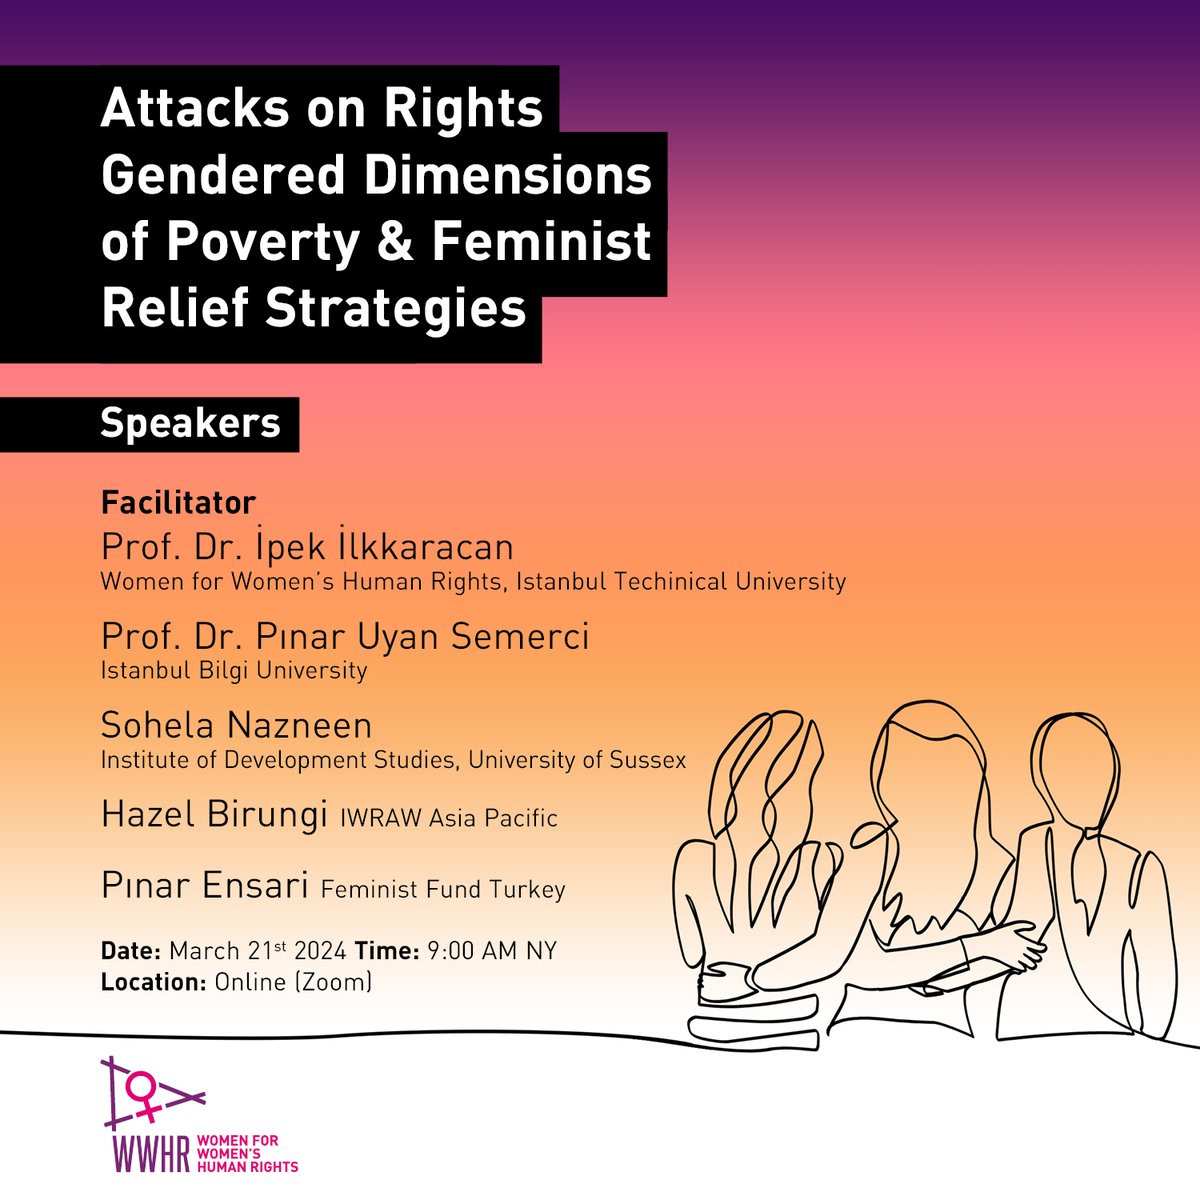 Pınar Uyan-Semerci (@PinarUyan) will speak for the panel titled 'Attacks on Rights Gendered Dimensions of Poverty & Feminist Relief Strategies'. forms.gle/2zQdJvHqzbpig4…